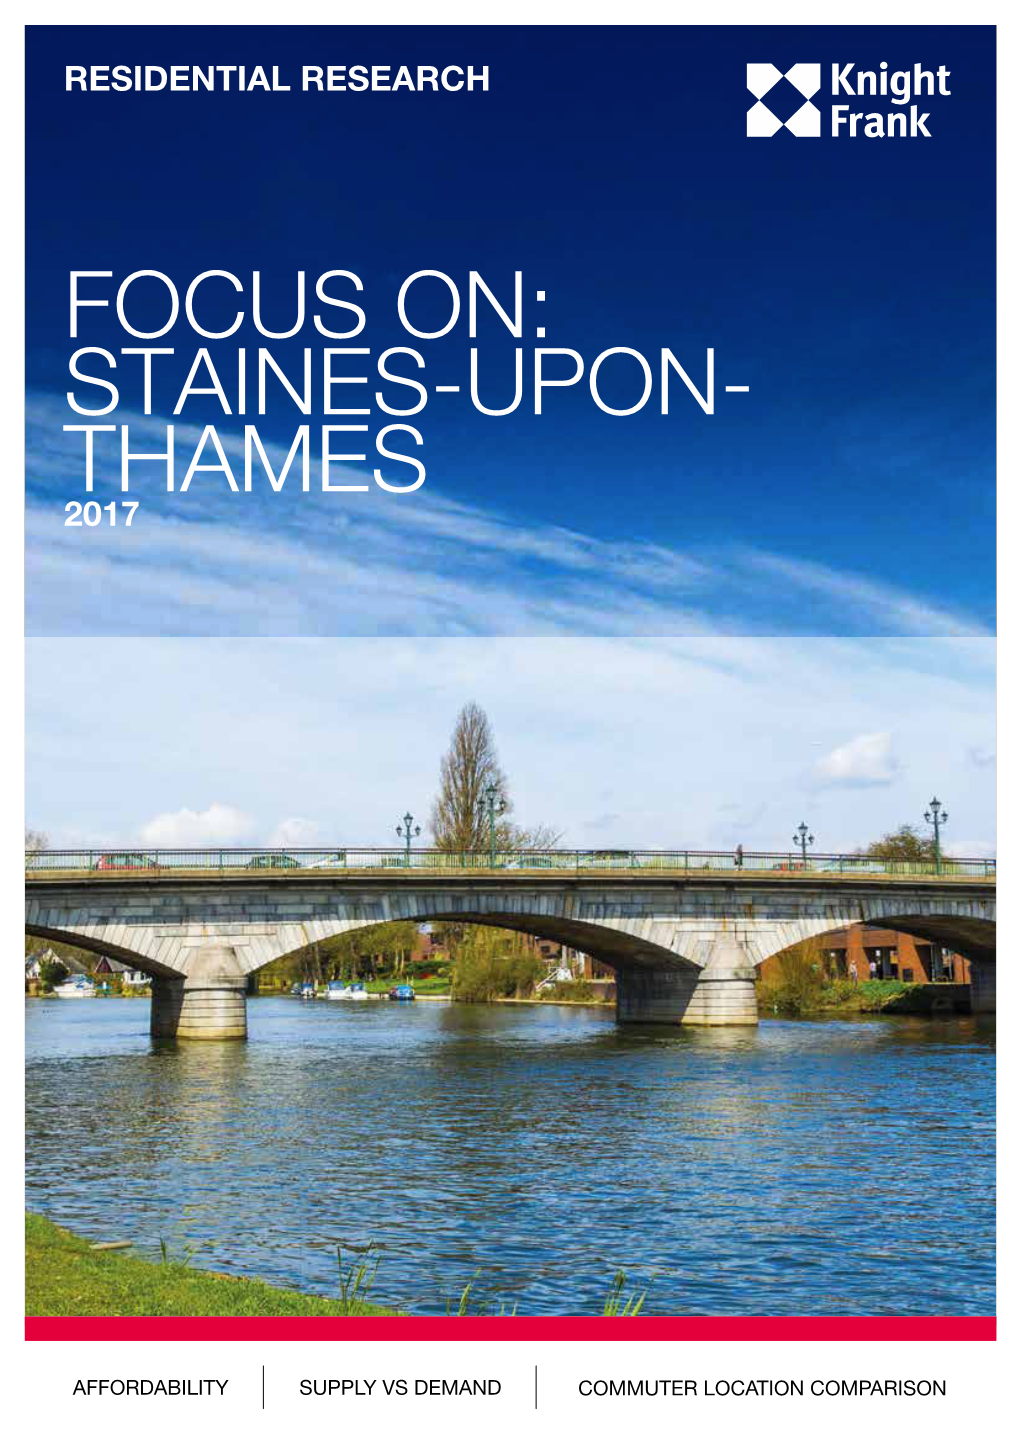 Staines-Upon- Thames